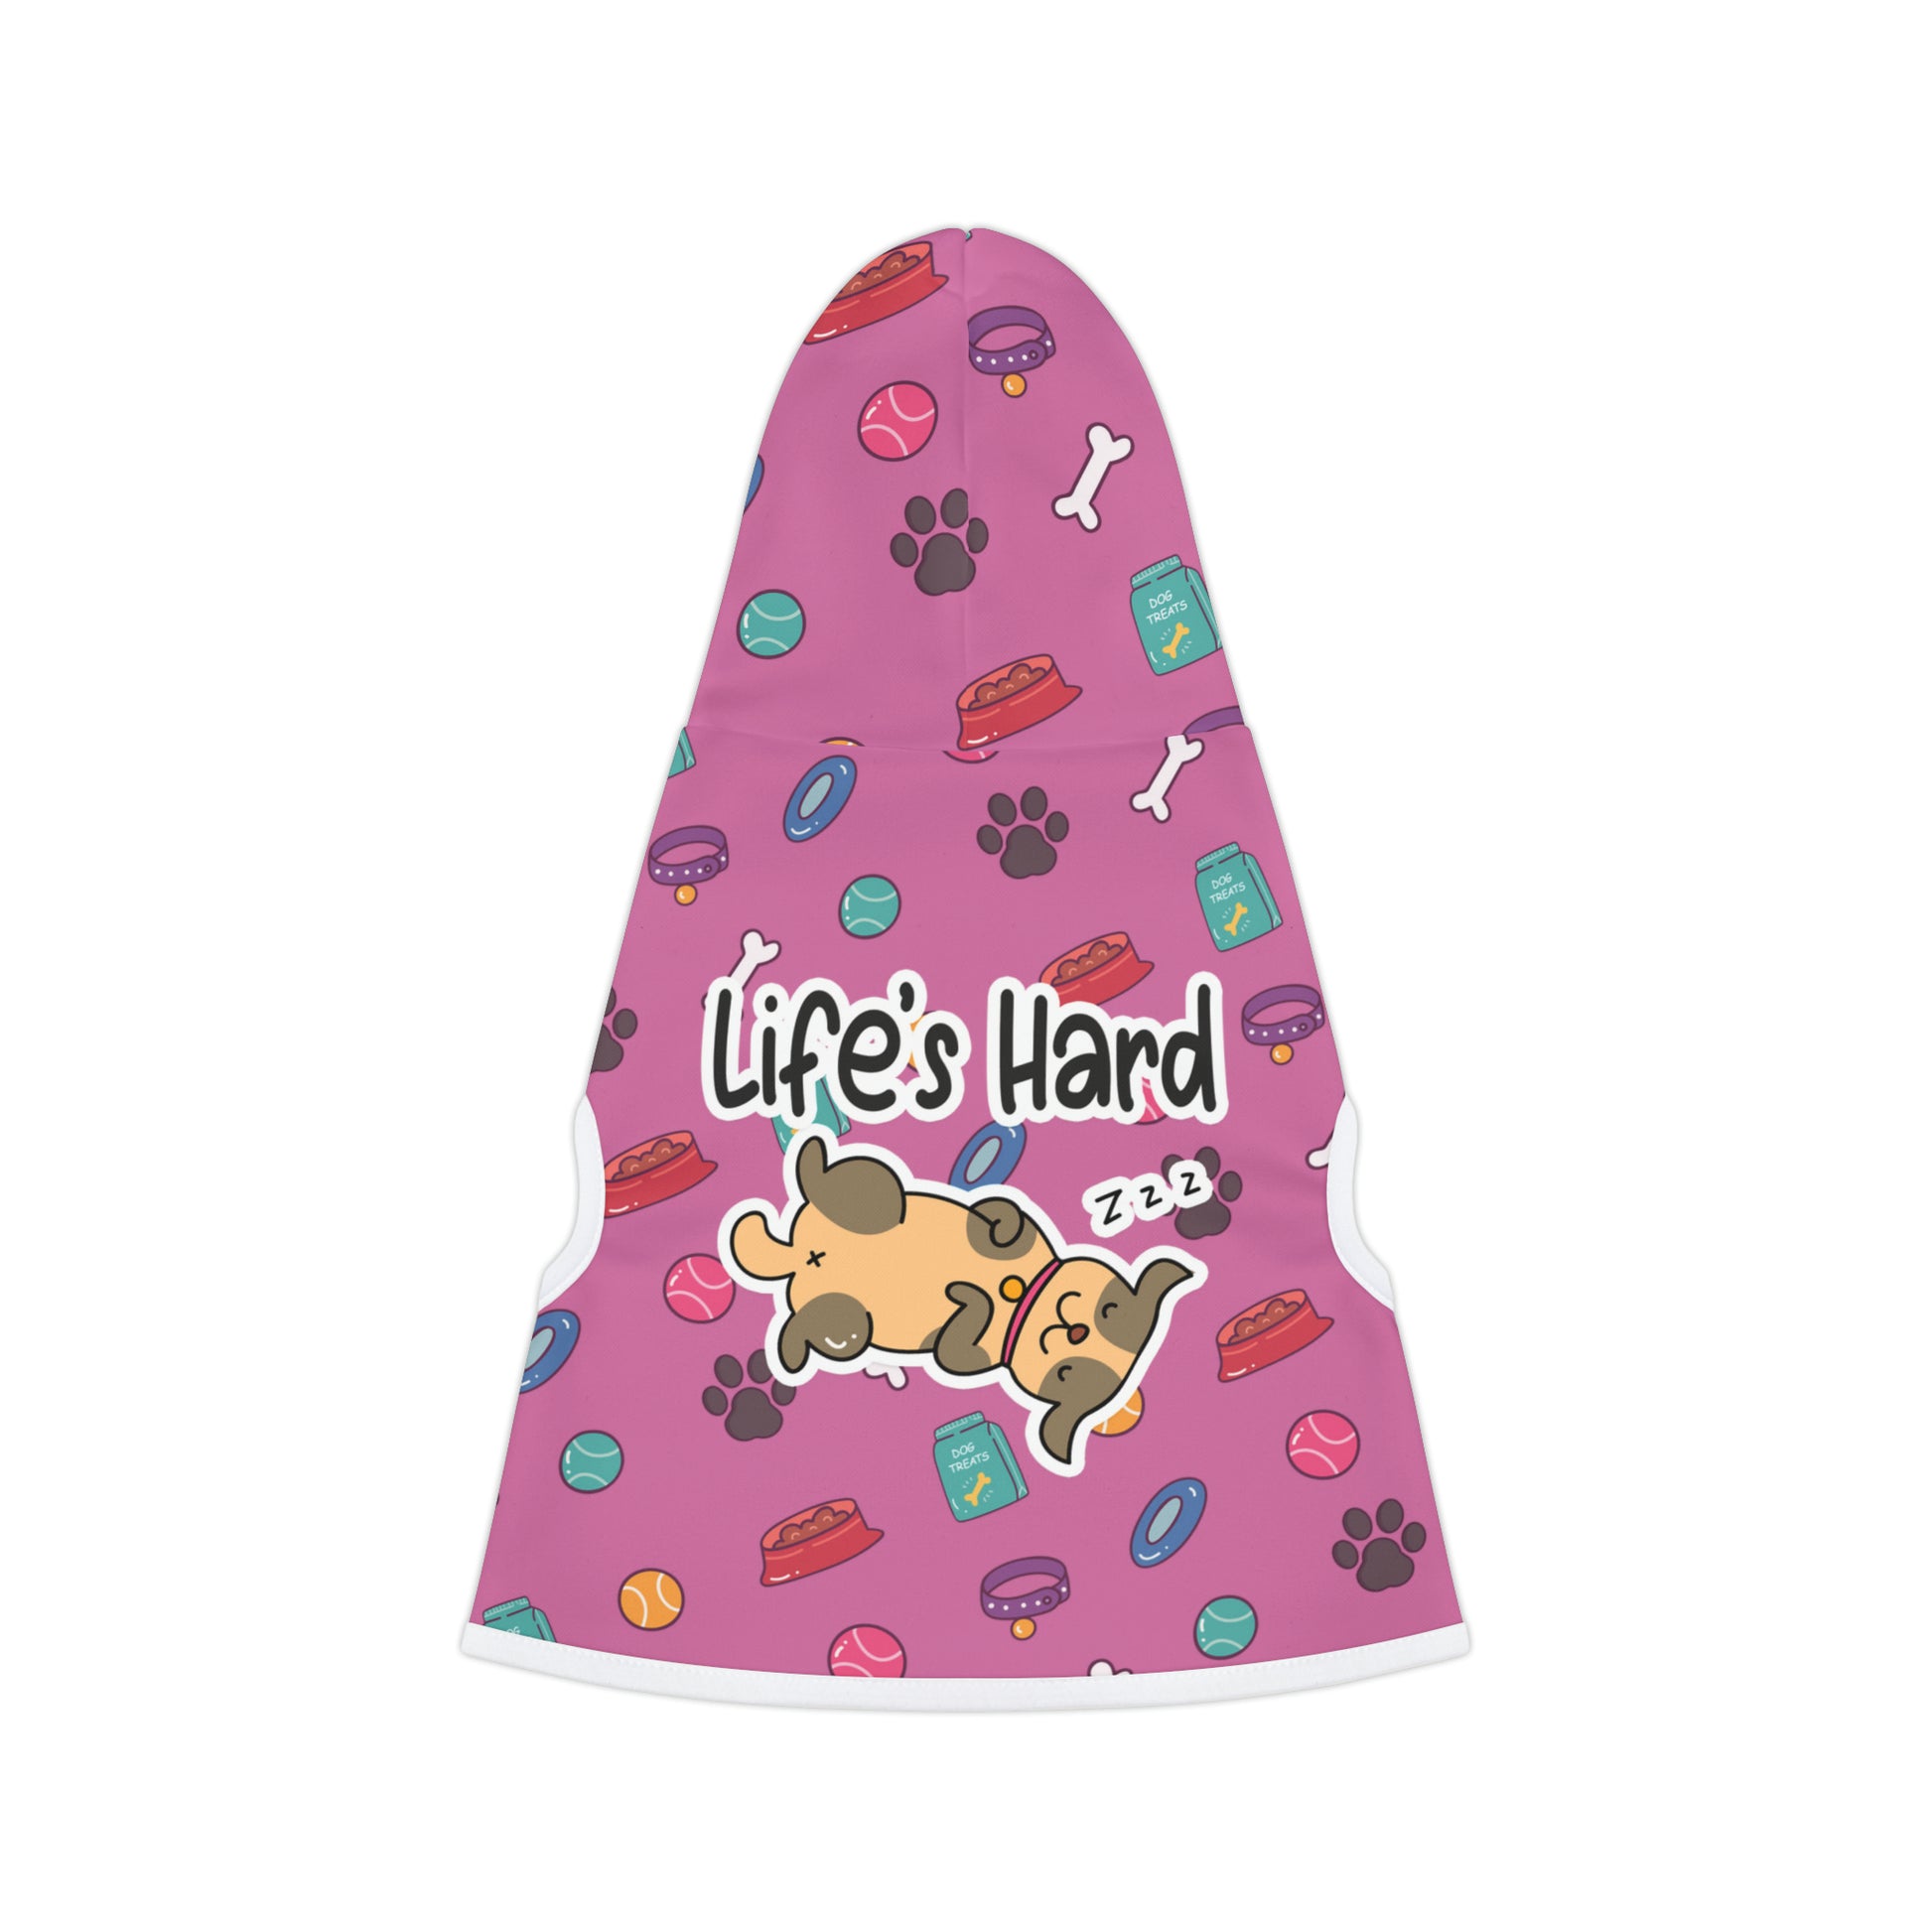 A pet hoodie with a beautiful pattern design featuring all things dog love. A smiling dog sleeping below a message that says "Life's hard". Hoodie's Color is pink